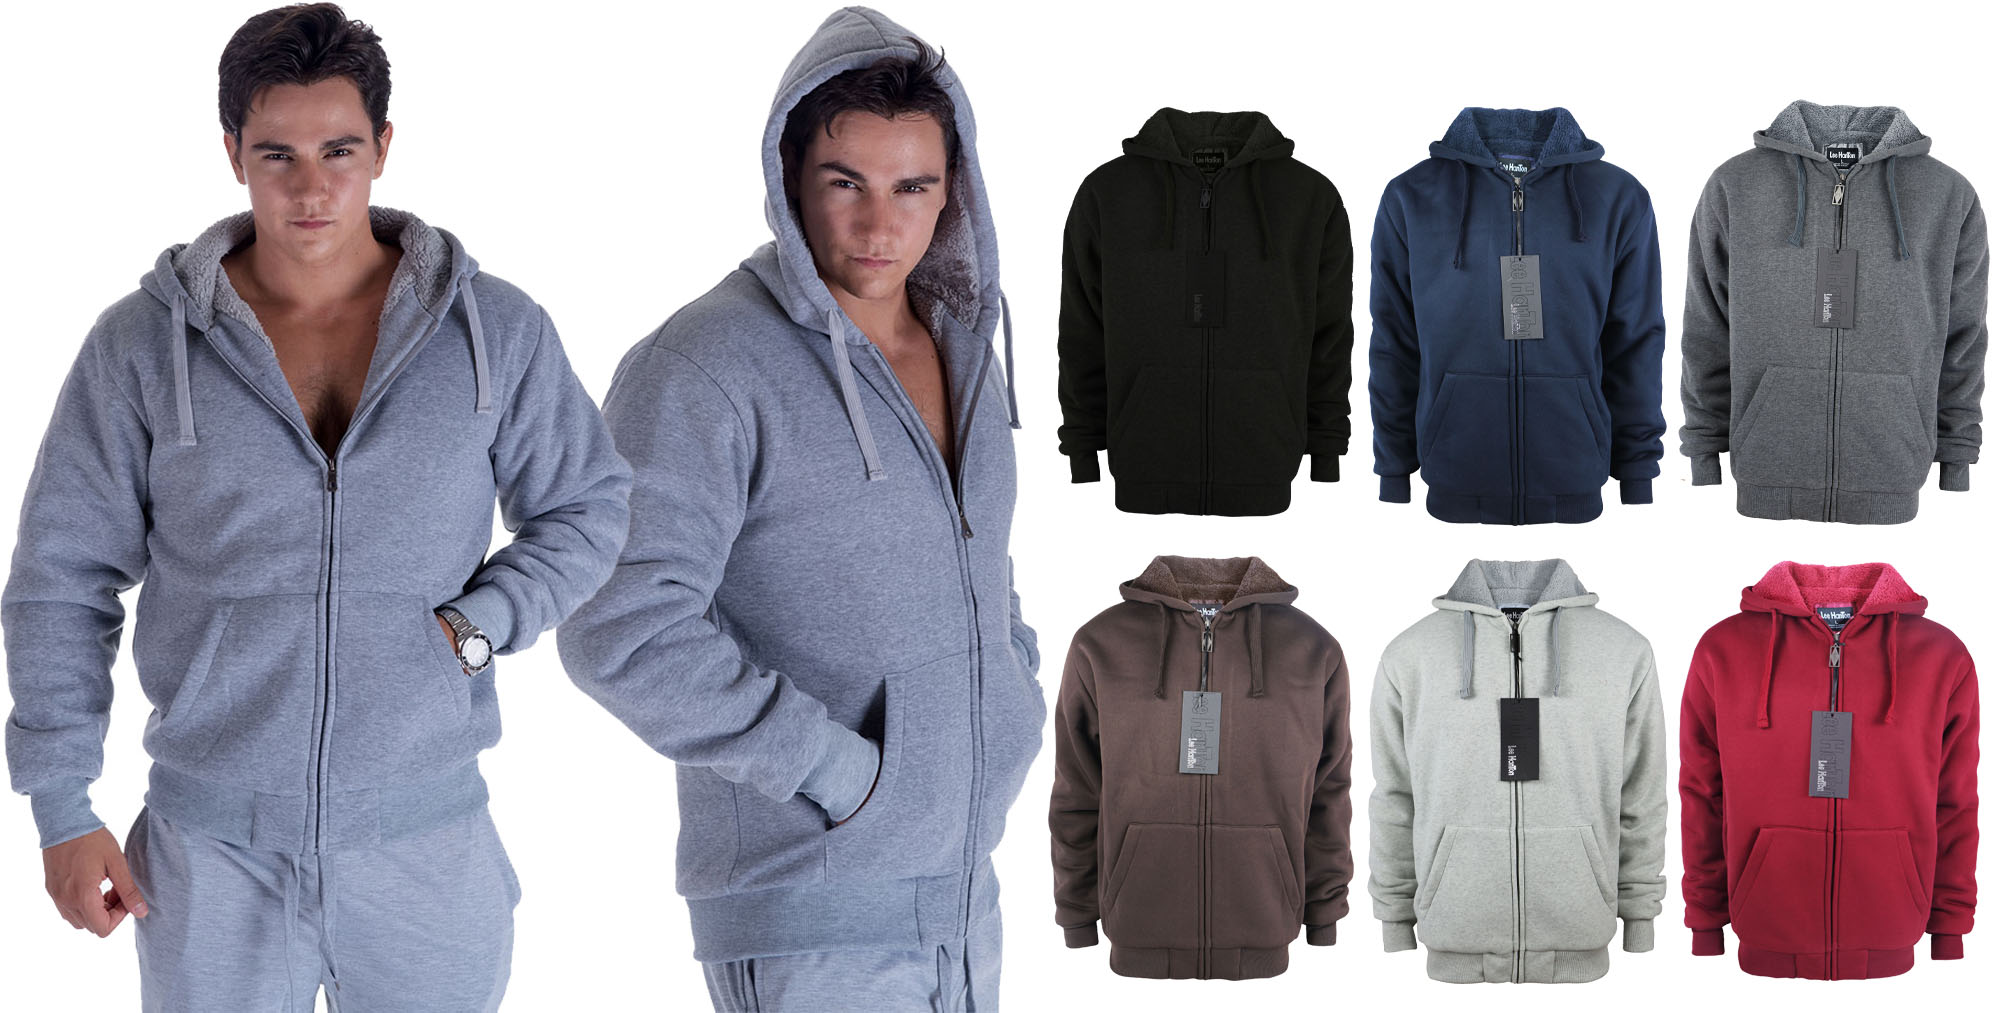 Men's Solid Colored HOODIES w/ Sherpa Lining & Zipper - Choose Your Color(s)